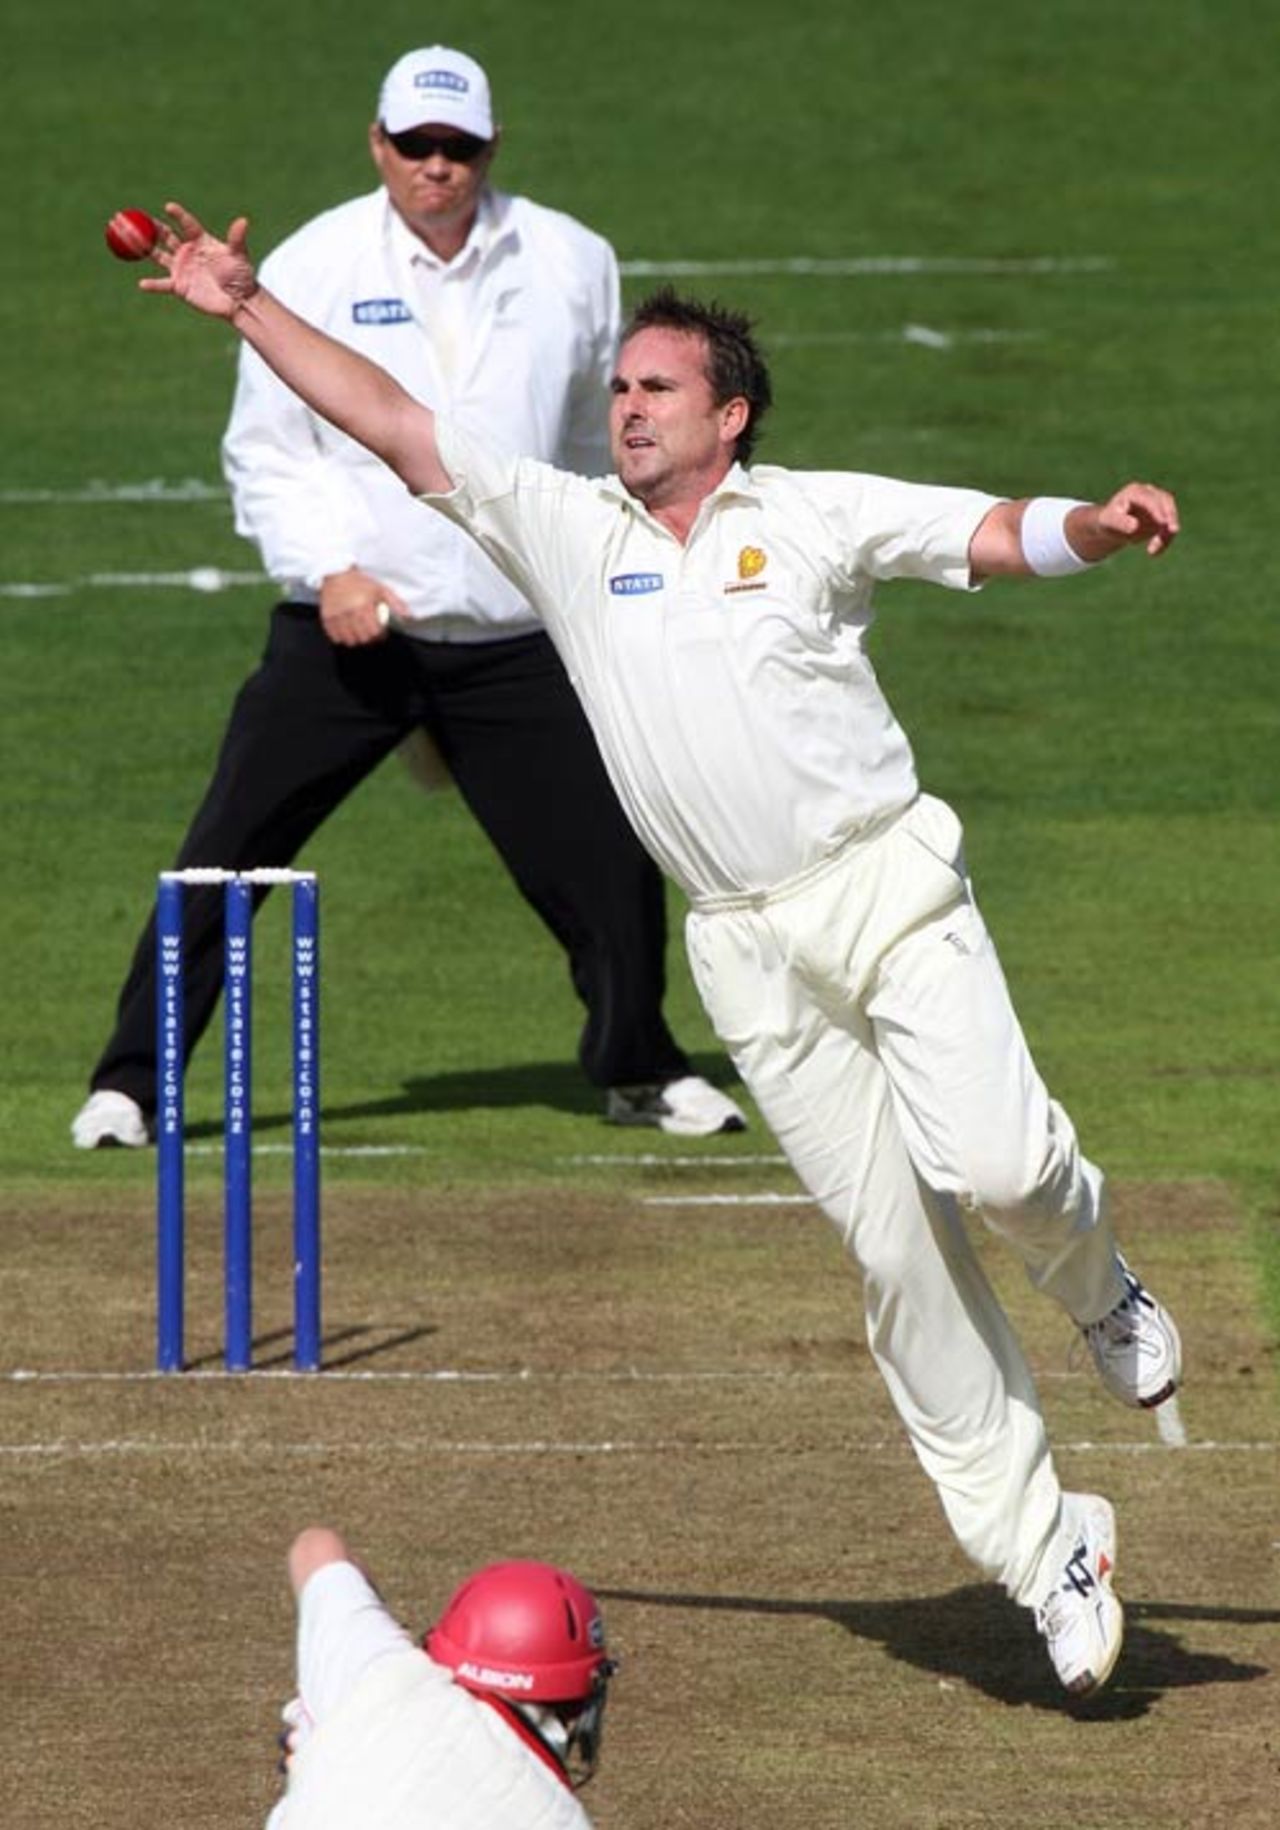 Mark Gillespie fields off his own bowling, Wellington v Canterbury, State Championship final, Wellington, April 7, 2008